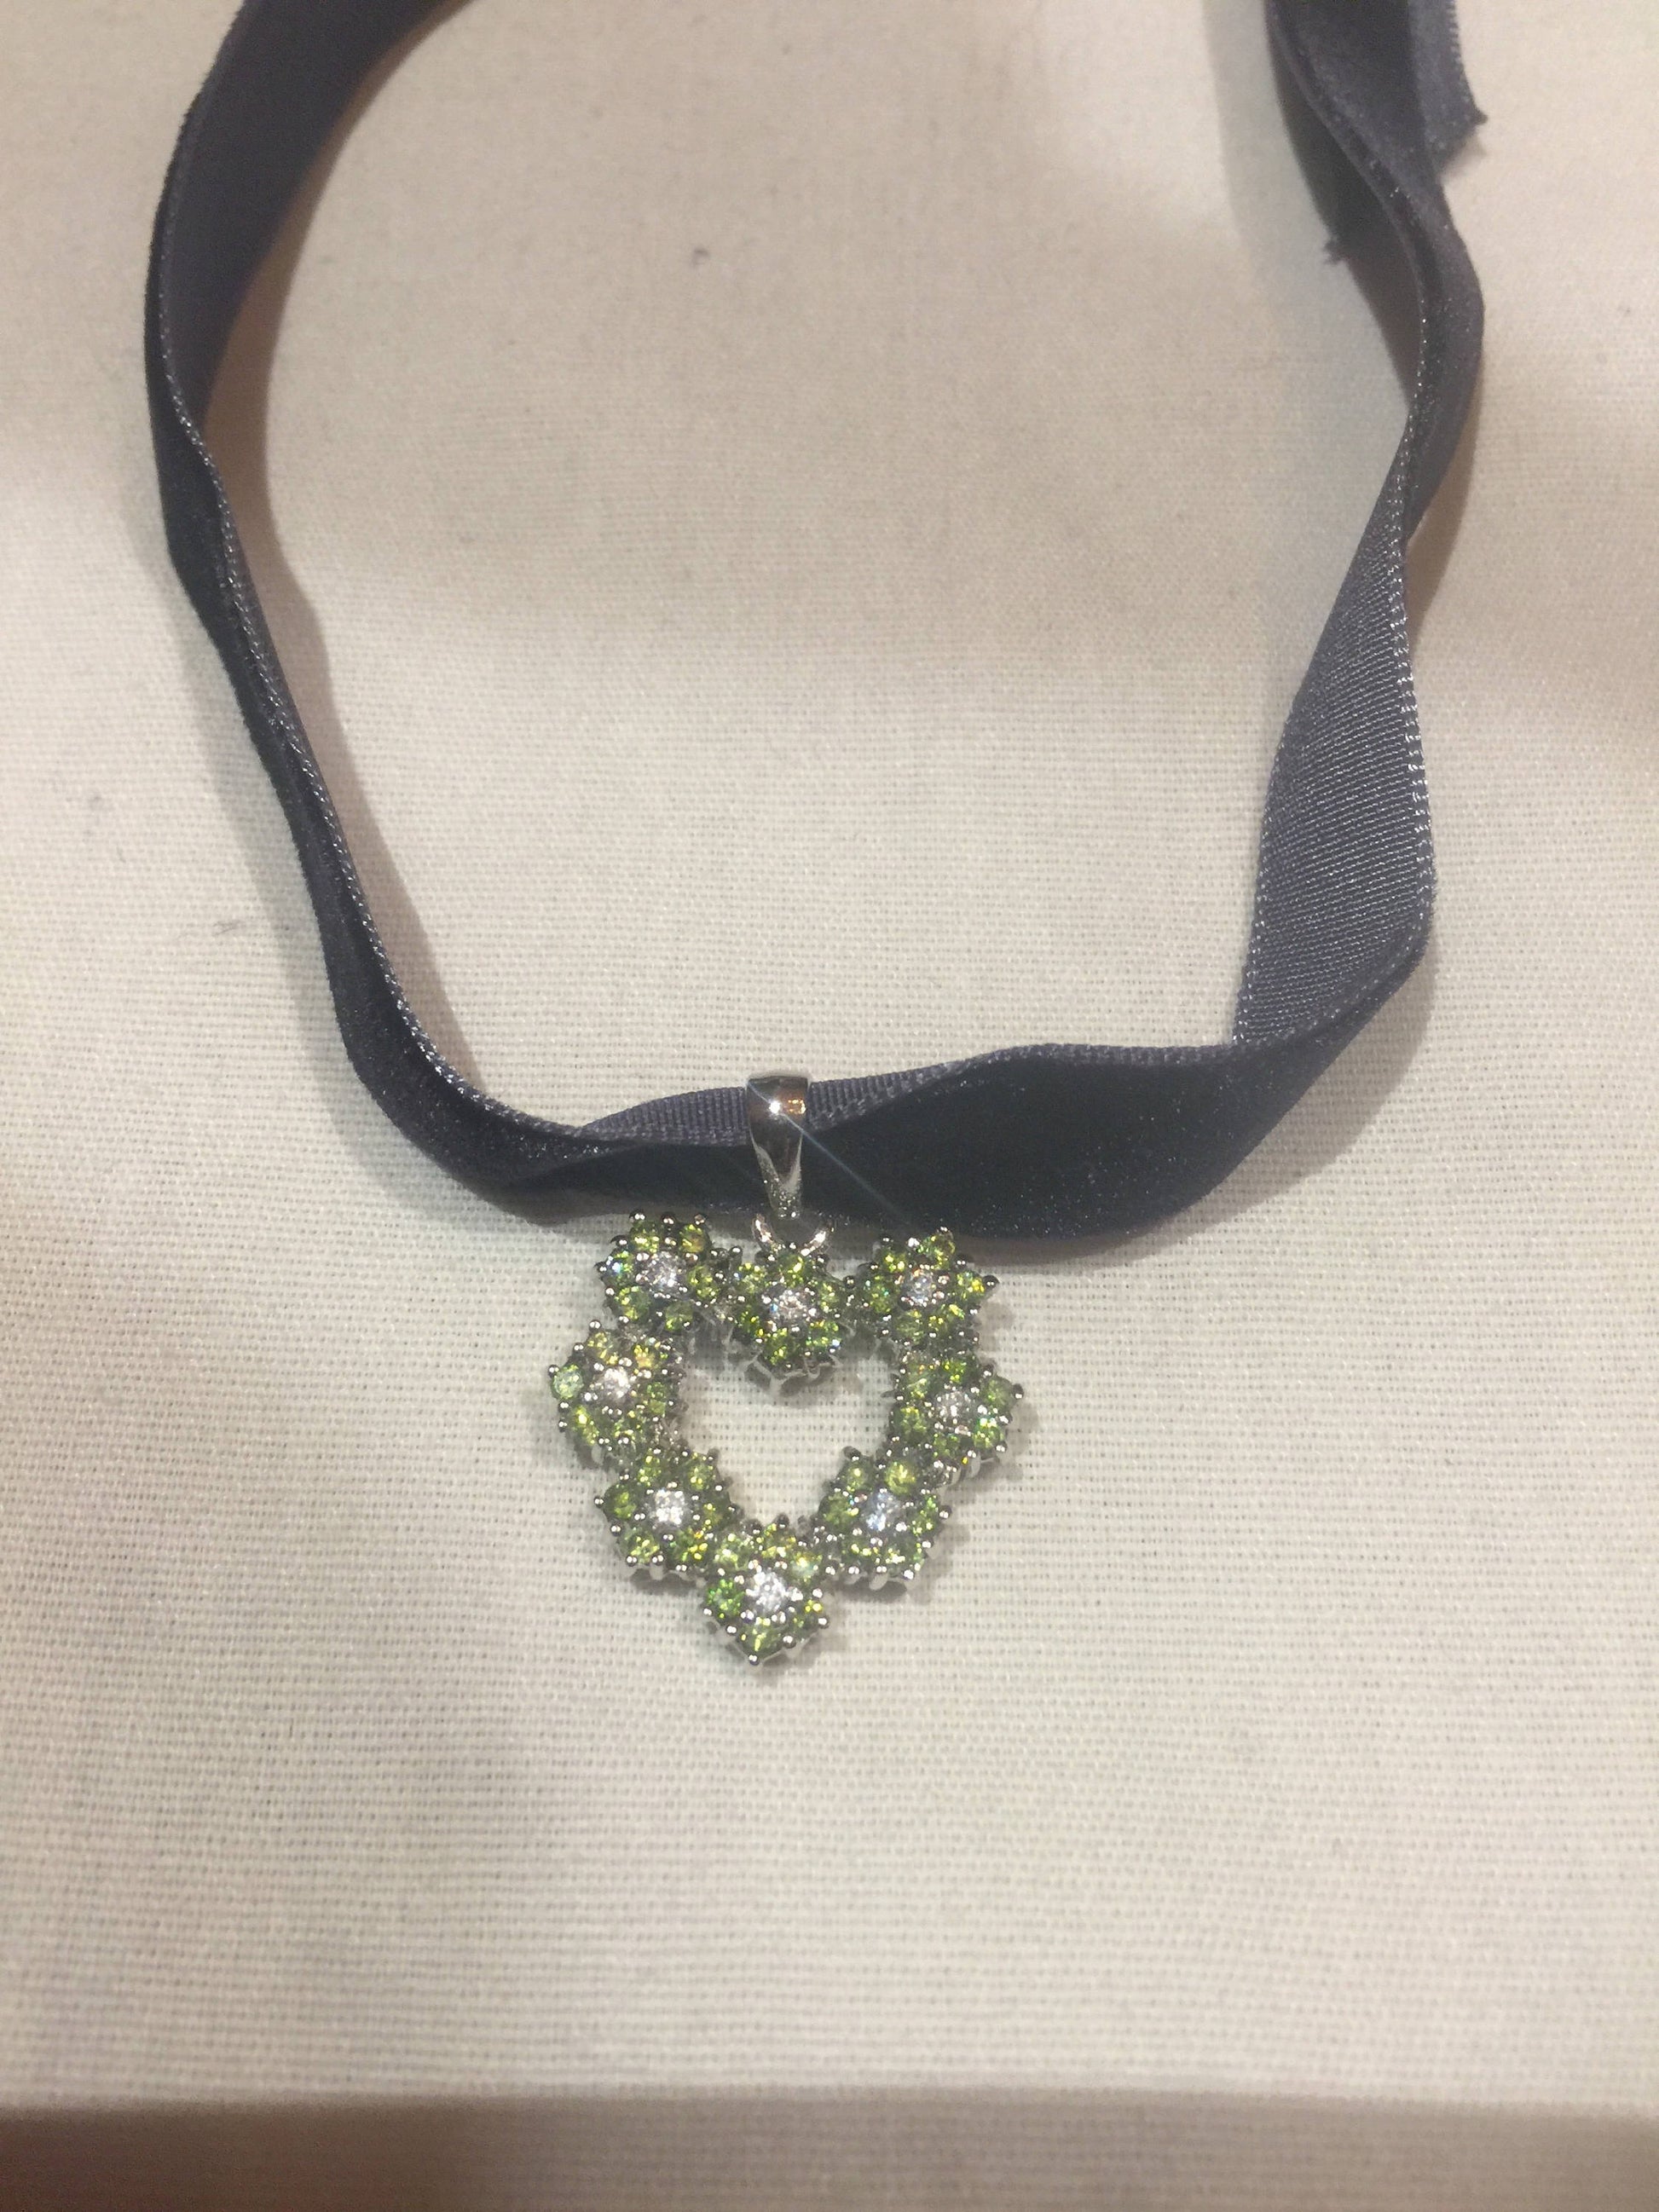 Vintage 925 Sterling Silver Green Peridot Heart Pendant Necklace